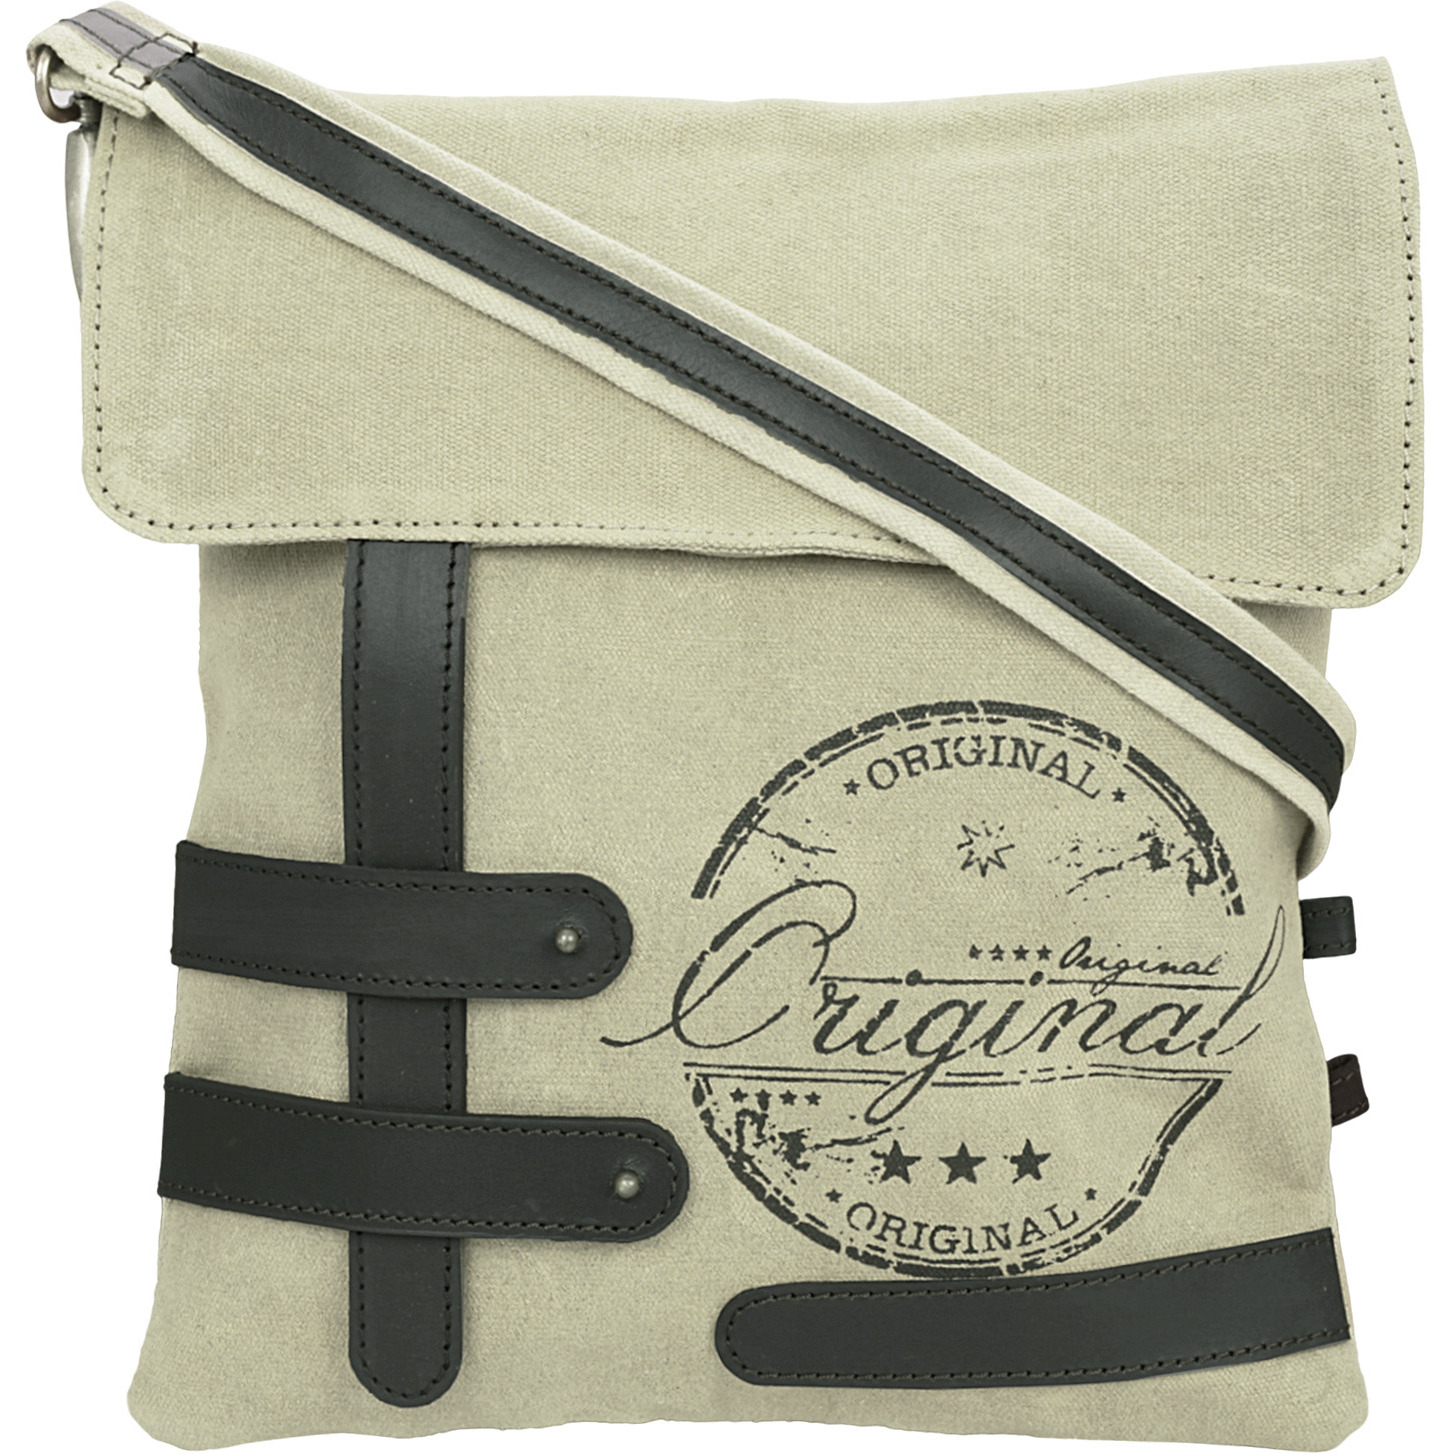 NEUDIS Genuine Leather & Recycled Stone Washed Canvas Travel Sling / Cross Body Bag for iPad & Tablet - Original - Beige